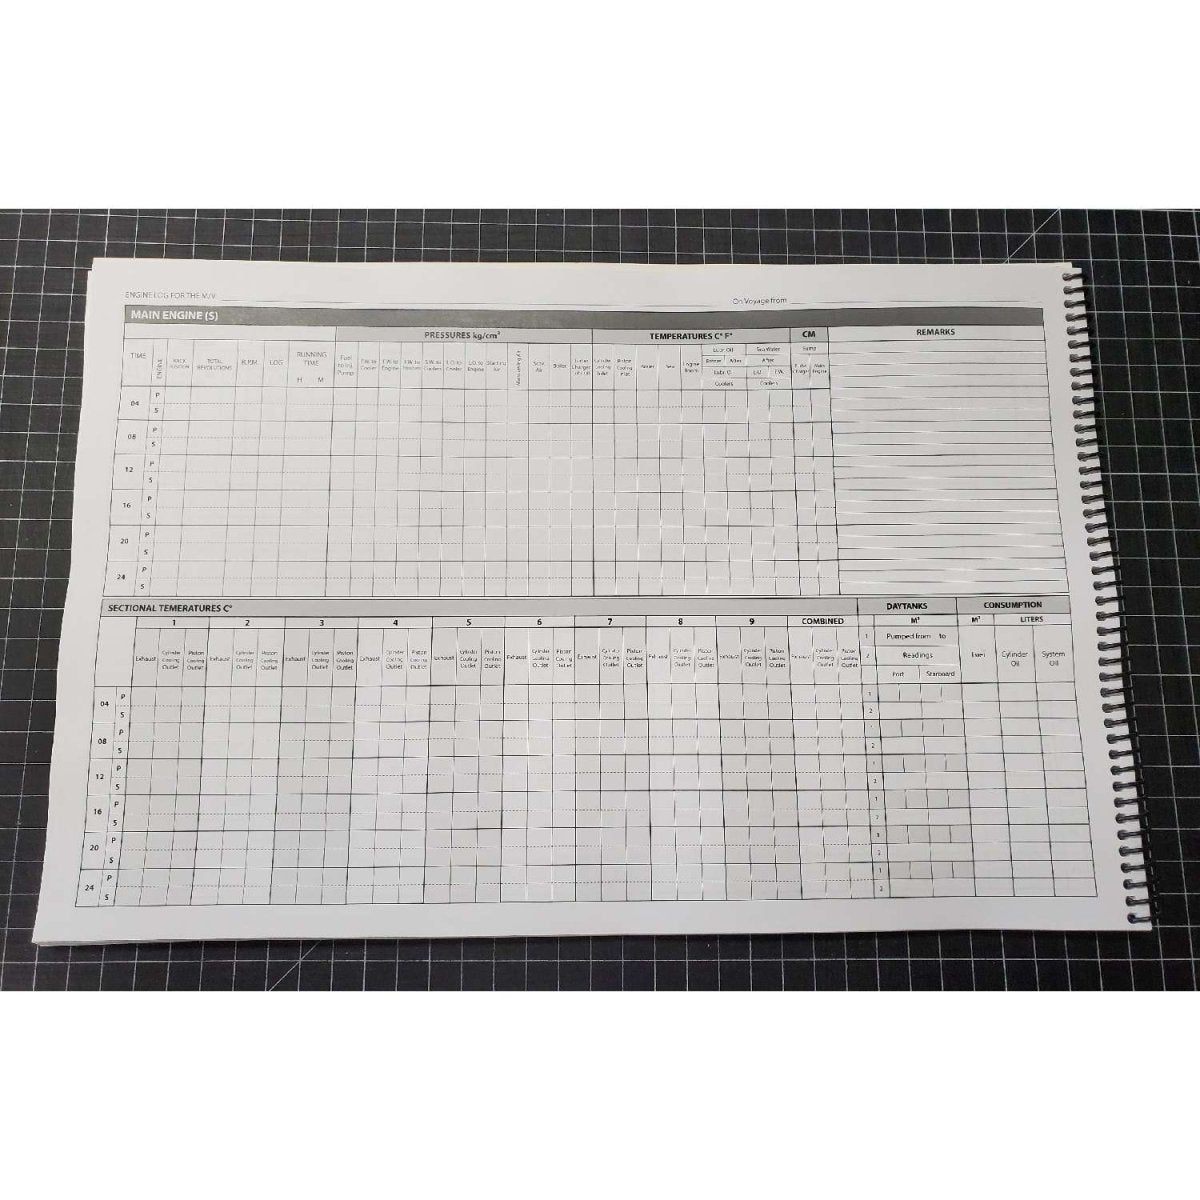 Engineers Log Book - 62 day (11x17 spiral-bound) - Life Raft Professionals